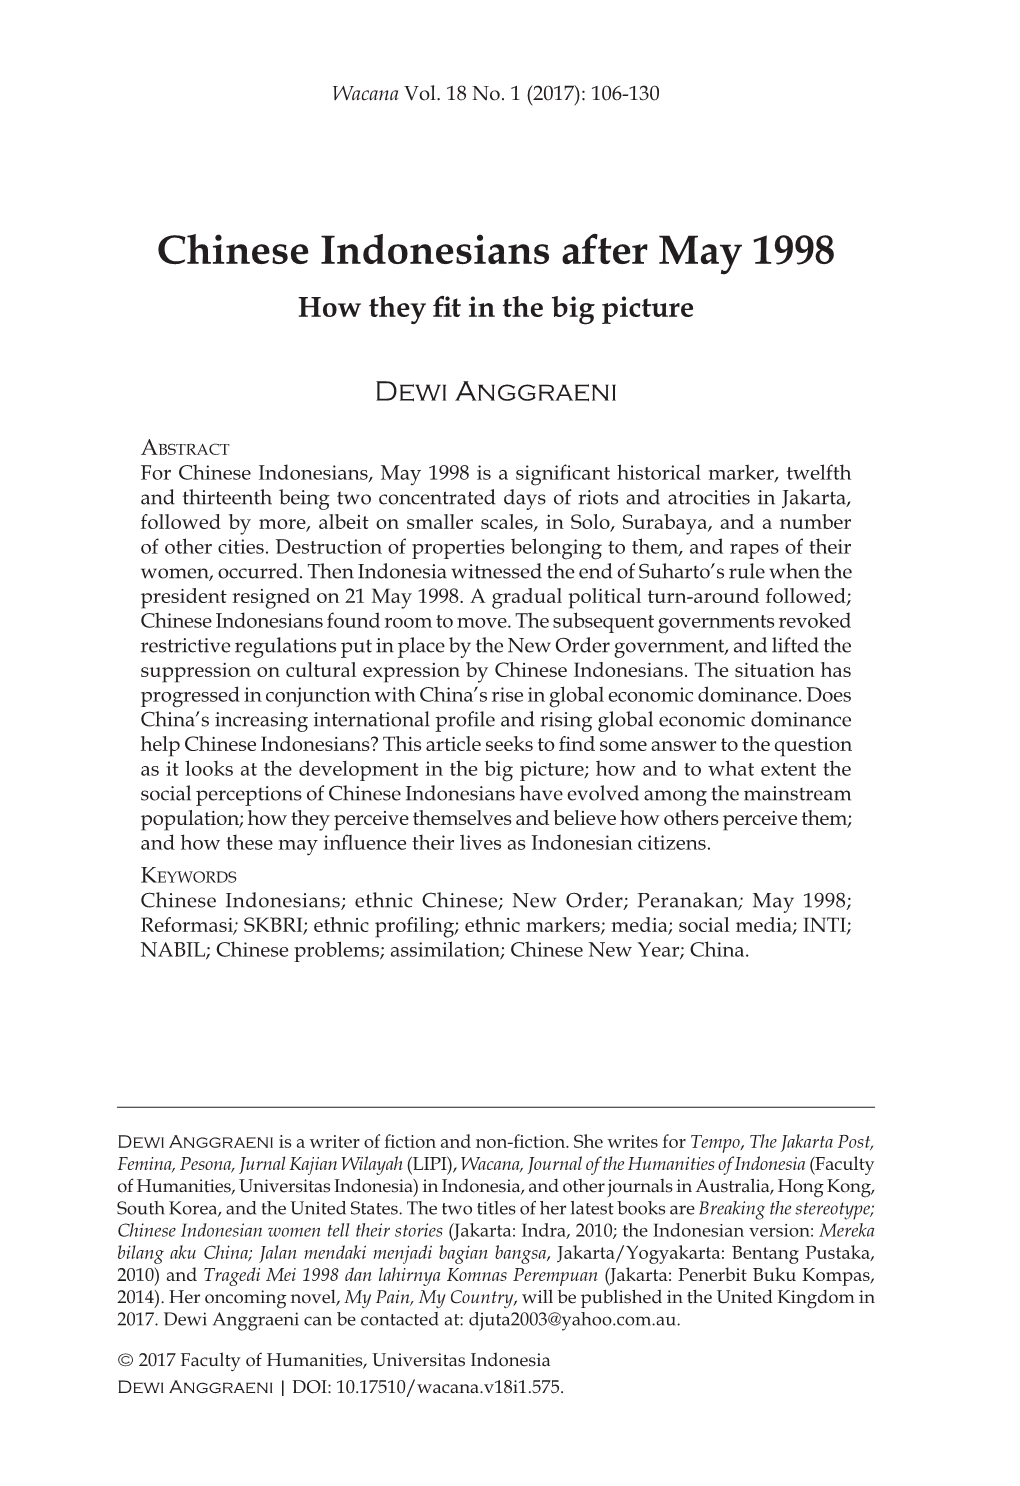 Chinese Indonesians After May 1998 How They Fit in the Big Picture